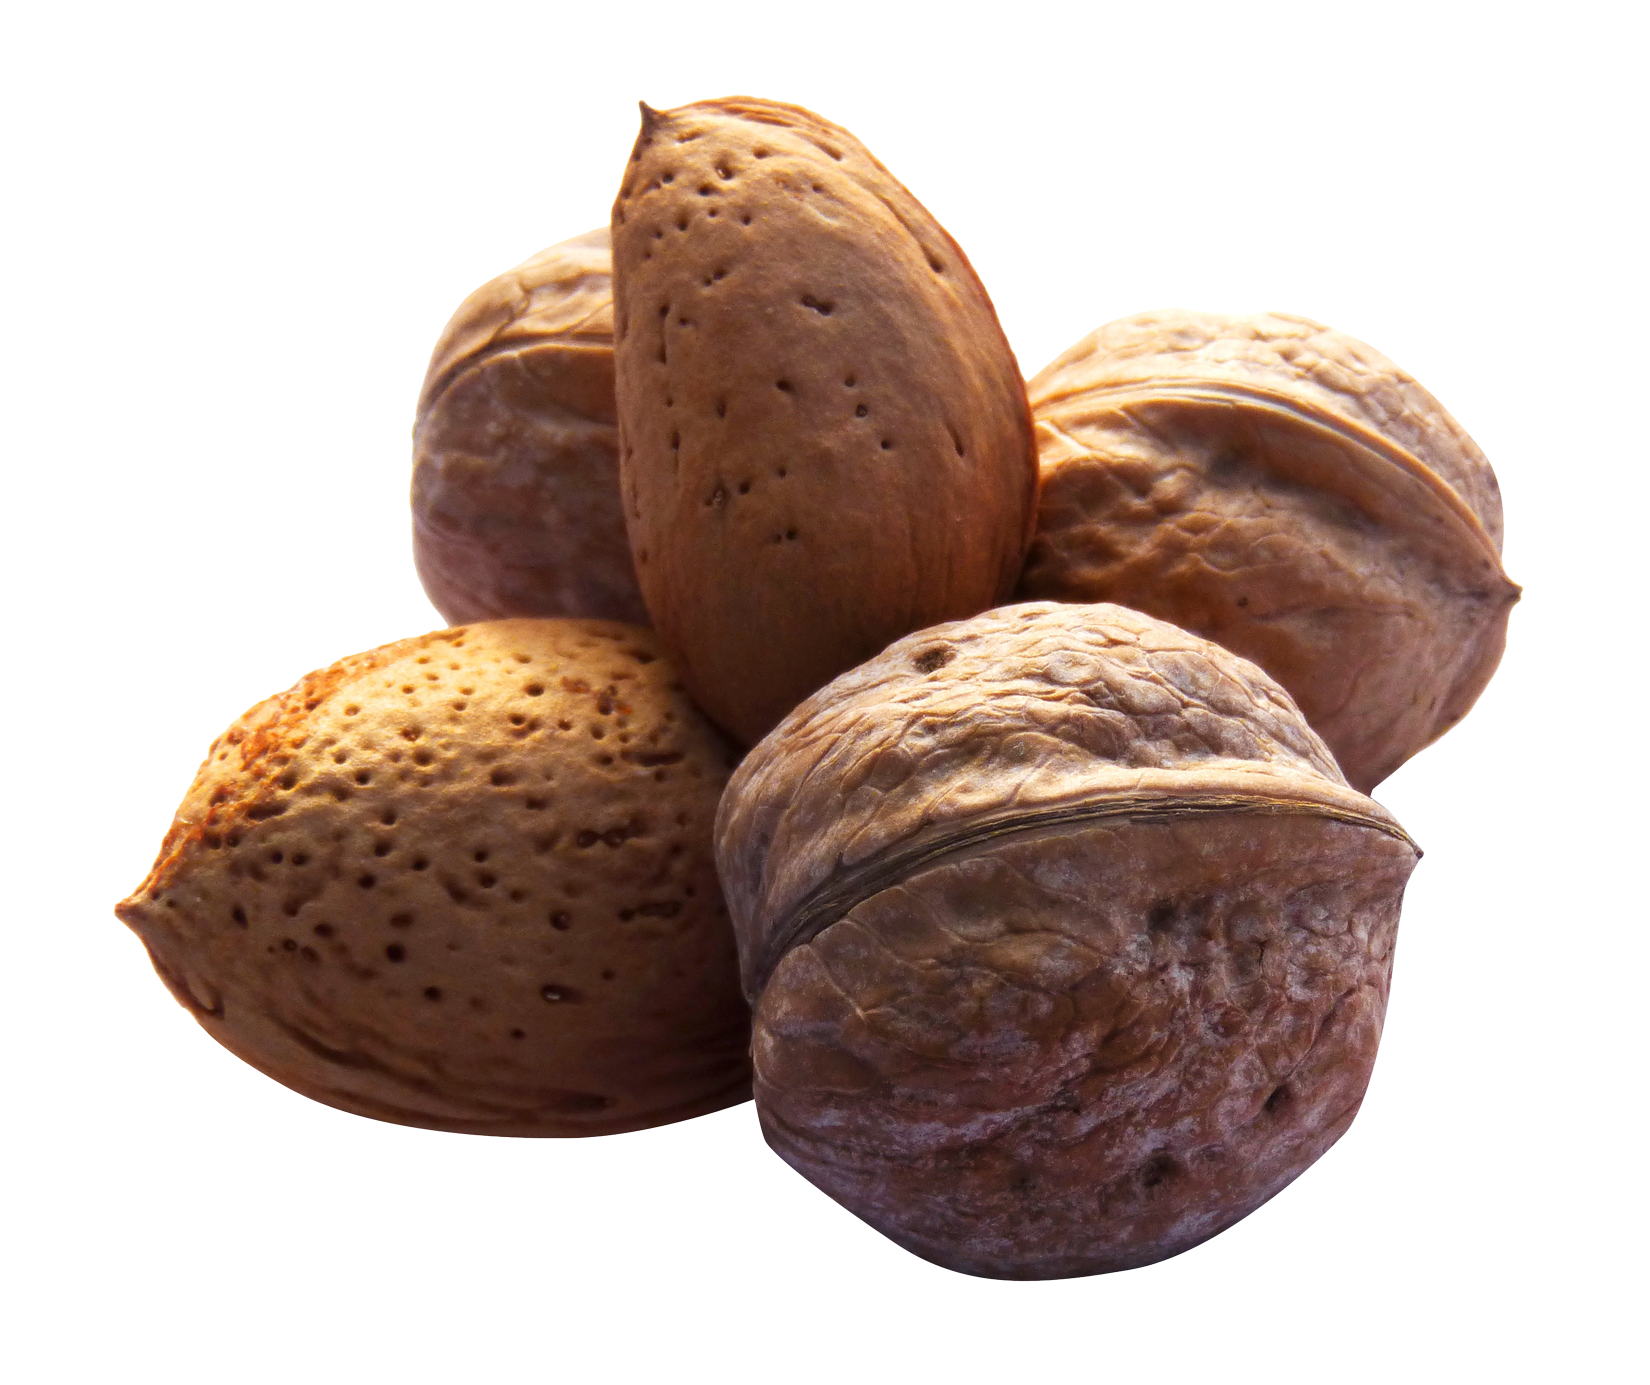 A Group Of Walnuts And Almonds